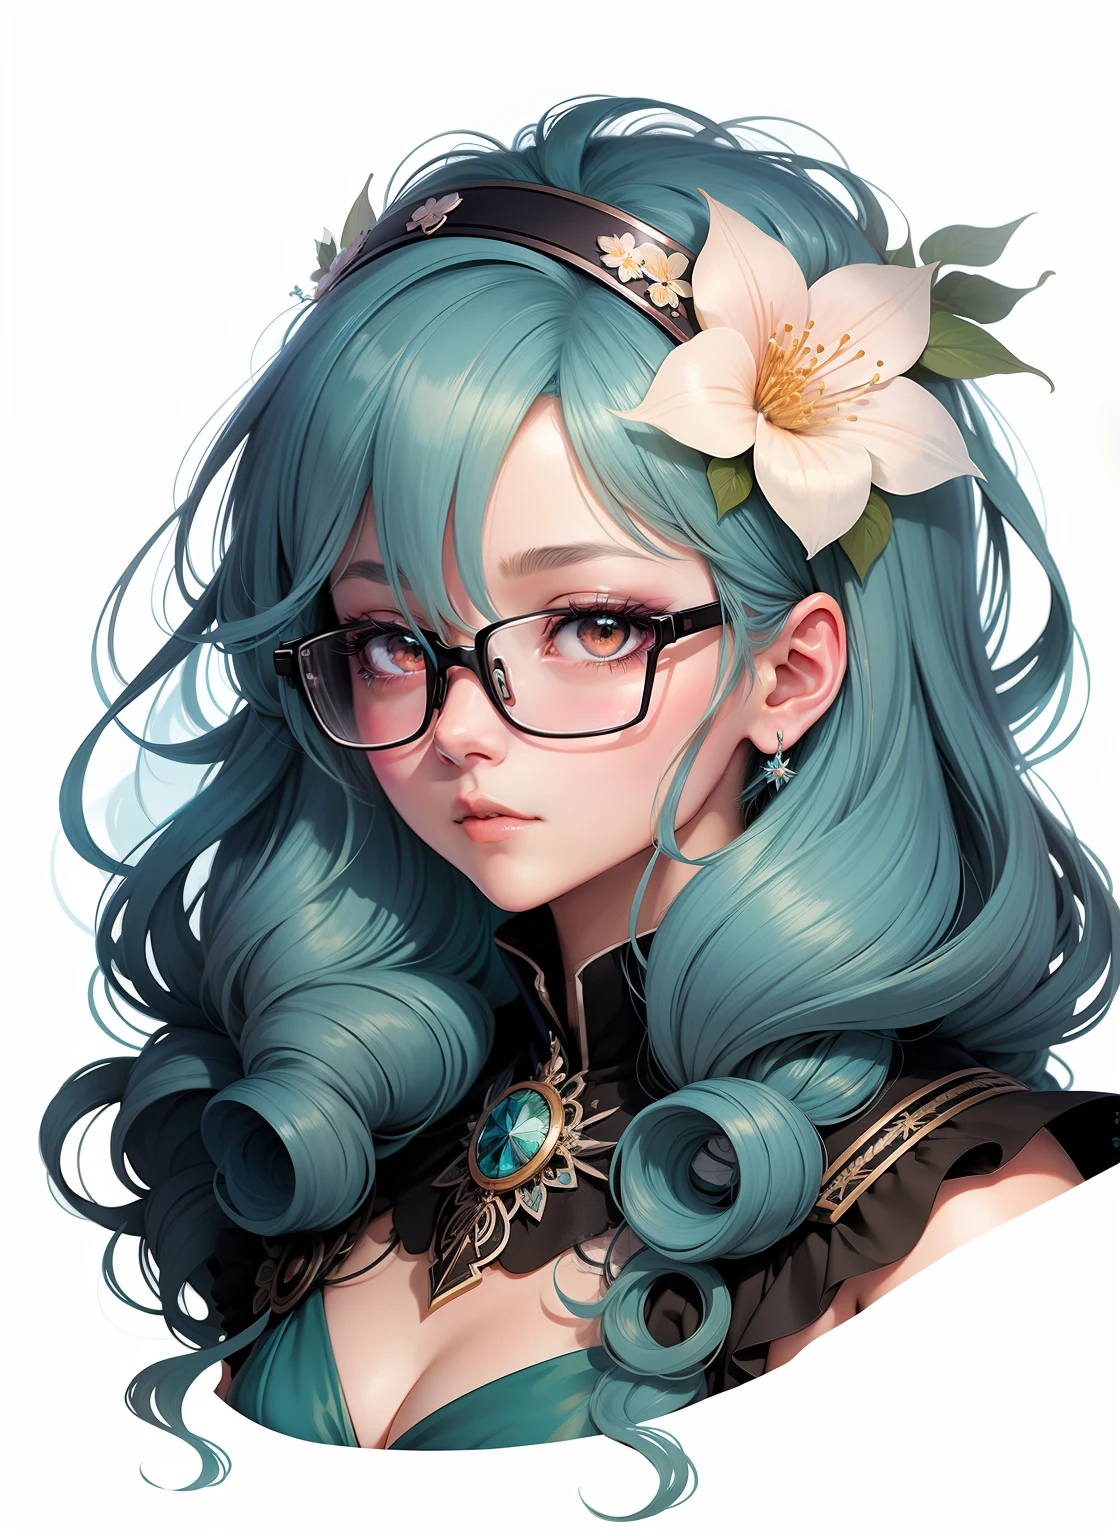 anime girl with blue hair and glasses with flowers in her hair, detailed digital anime art, anime styled digital art, digital anime illustration, beautiful anime art style, digital art on pixiv, anime style portrait, beautiful anime portrait, anime style 4 k, anime girl with teal hair, digital anime art, anime style illustration, anime art style, kawaii realistic portrait,drawing of a woman with blue hair and glasses with flowers in her hair, 2 d anime style, decora inspired illustrations, inspired by Yumihiko Amano, anime girl with teal hair, anime style portrait, beautiful anime art style, portrait of jinx from arcane, manga art style, anime style illustration, anime art style, anime style art, anime styled, beautiful line art, detailed manga style, extremely fine ink lineart, black and white manga style, black and white line art, ink manga drawing, intense line art, pencil and ink manga drawing, intense black line art, in style of manga, exquisite line art, perfect lineart,exquisite line art, exquisite digital illustration, detailed digital drawing, black and white coloring, digital anime illustration, a beautiful artwork illustration, detailed matte fantasy portrait, beautiful line art, great digital art with details, goddess. extremely high detail, 4k detailed digital art, stunning digital illustration